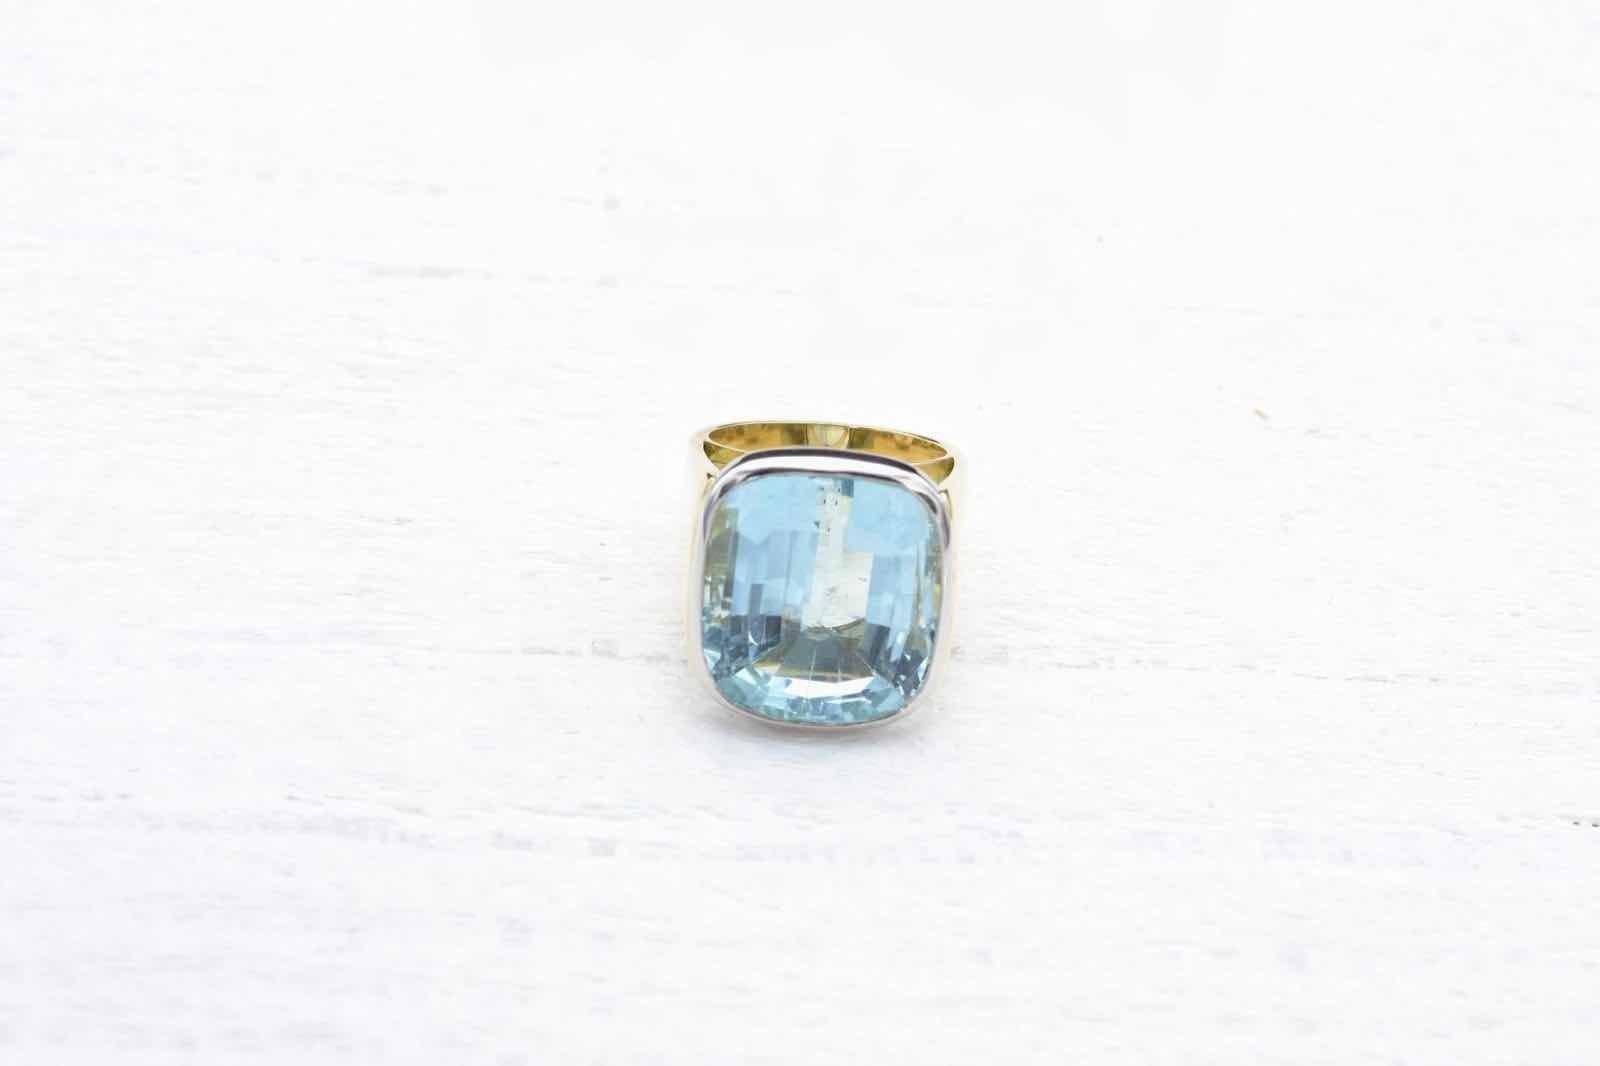 Stones: Natural aquamarine of 26.14 carats
Material: 18k yellow gold and platinum
Dimensions: 19 mm in length on finger and 10 mm in height
Weight: 19.6g
Size: 53 (free sizing)
Certificate
Ref. : 23765 / 23769